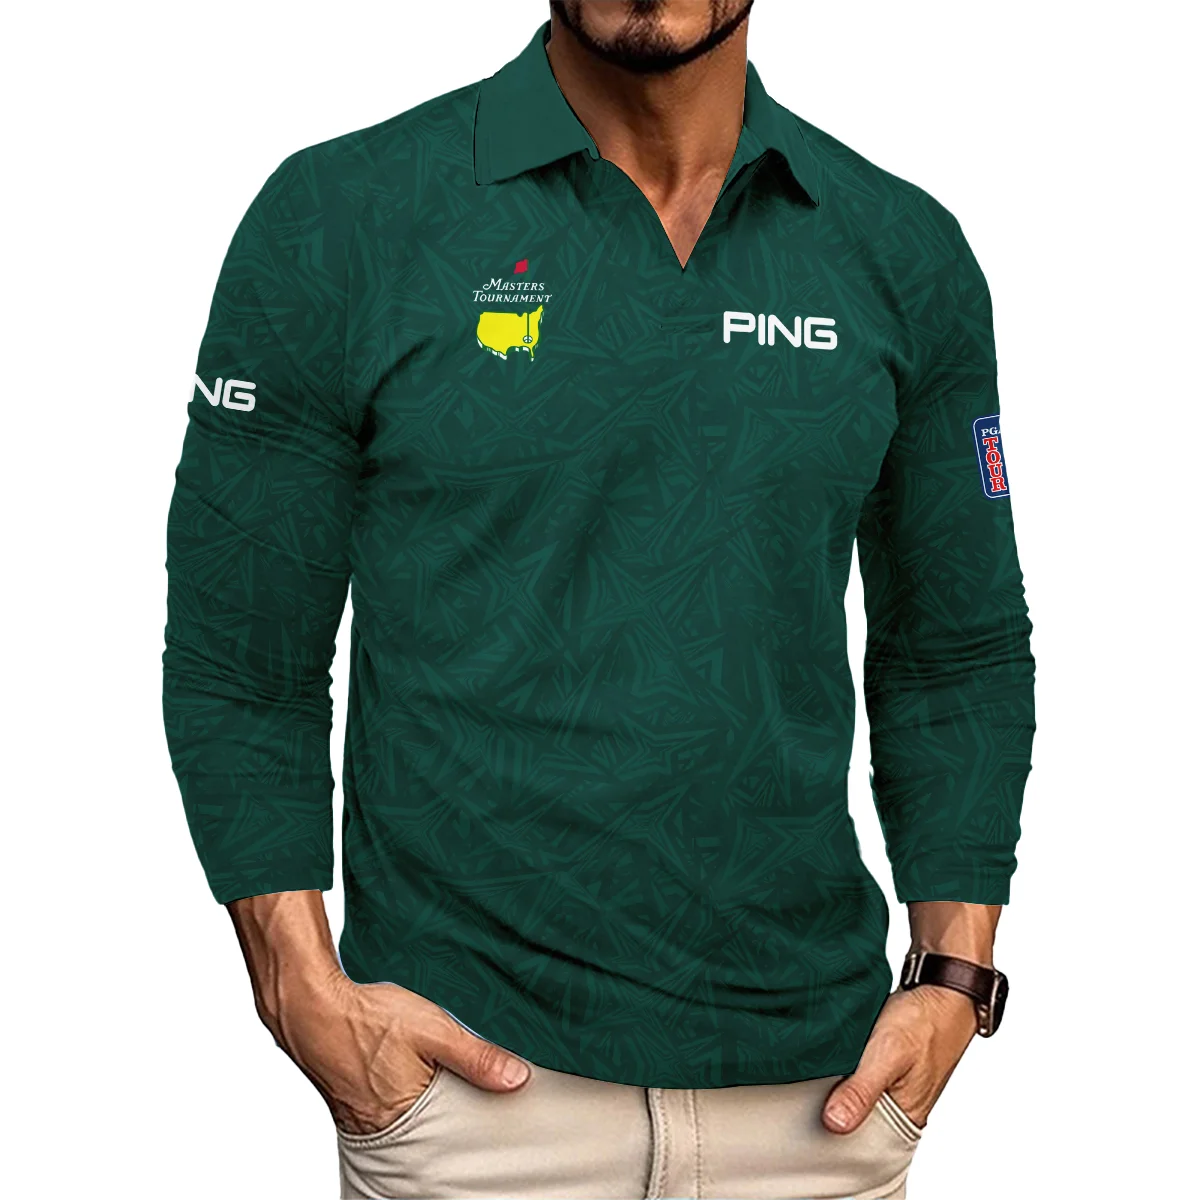 Stars Dark Green Abstract Sport Masters Tournament Ping Vneck Polo Shirt Style Classic Polo Shirt For Men